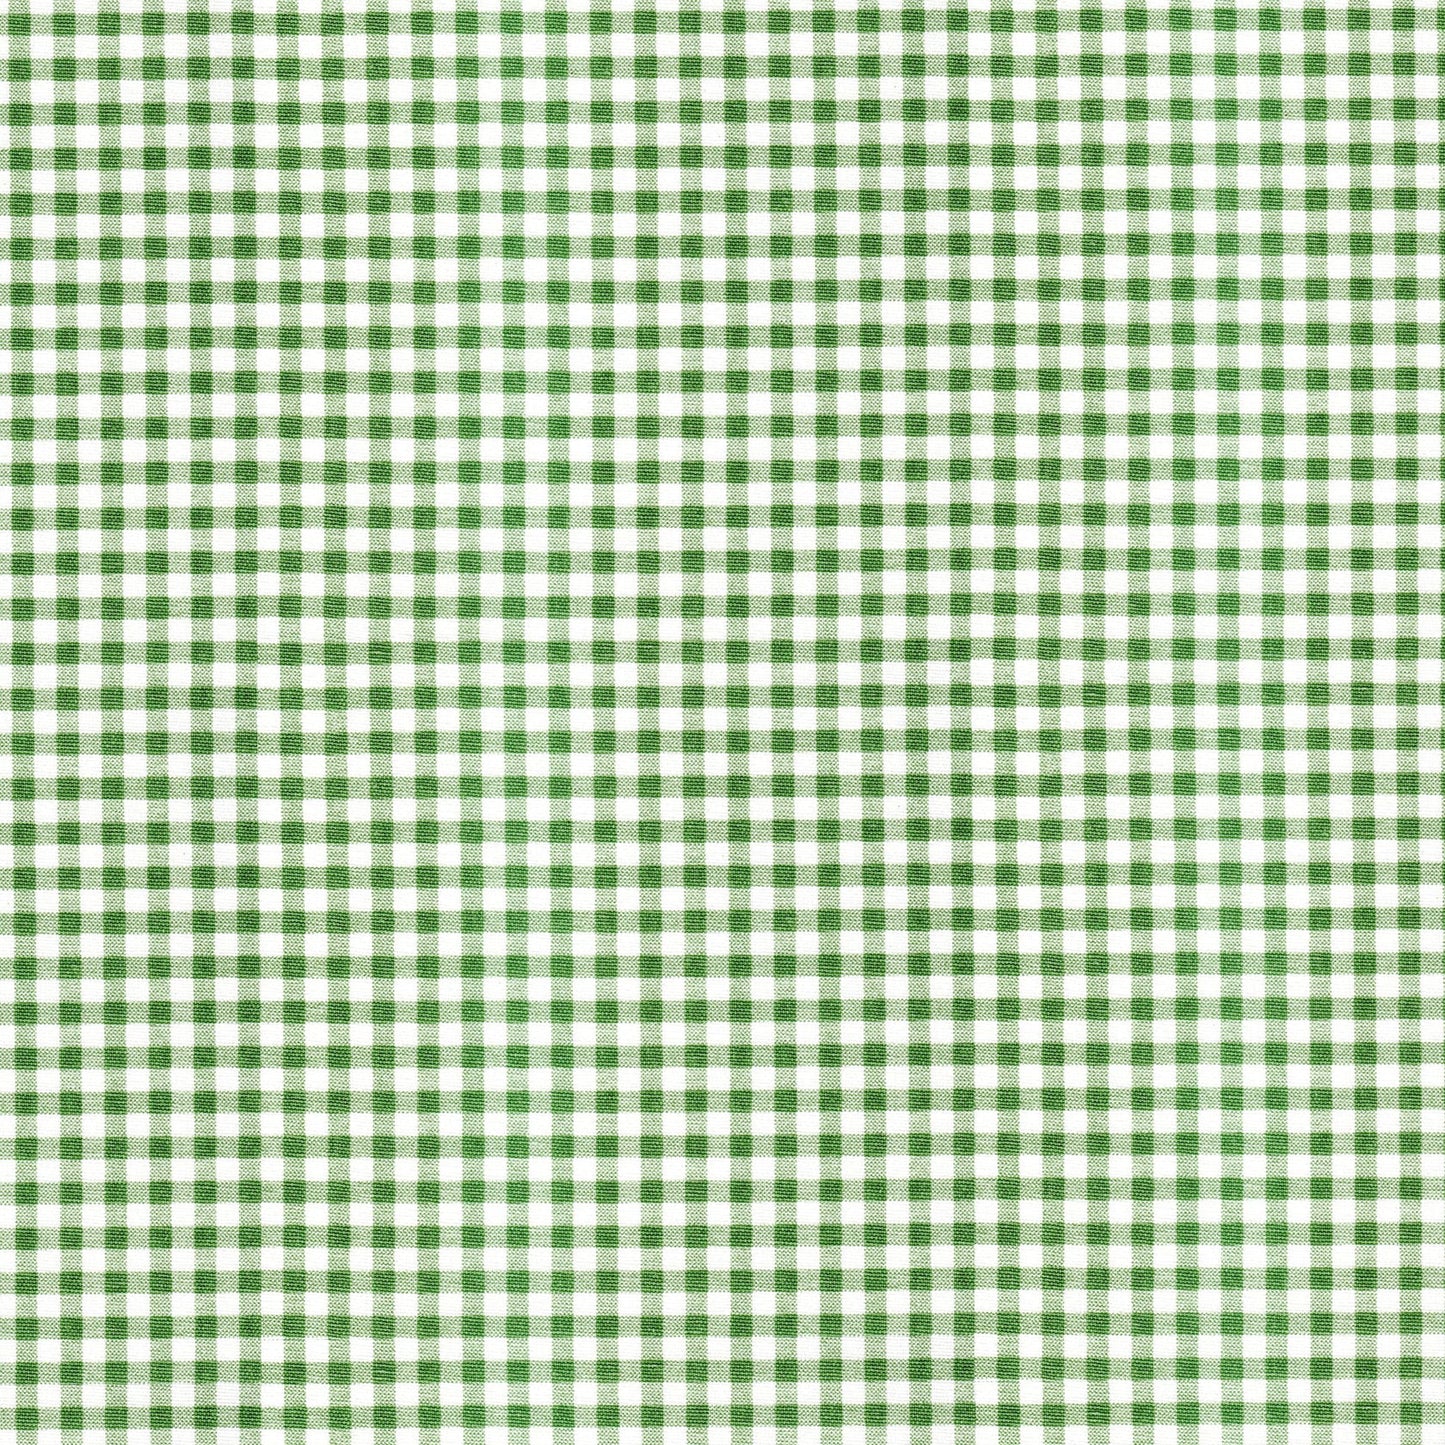 Round Tablecloth in Sage Green Large Gingham Check on White